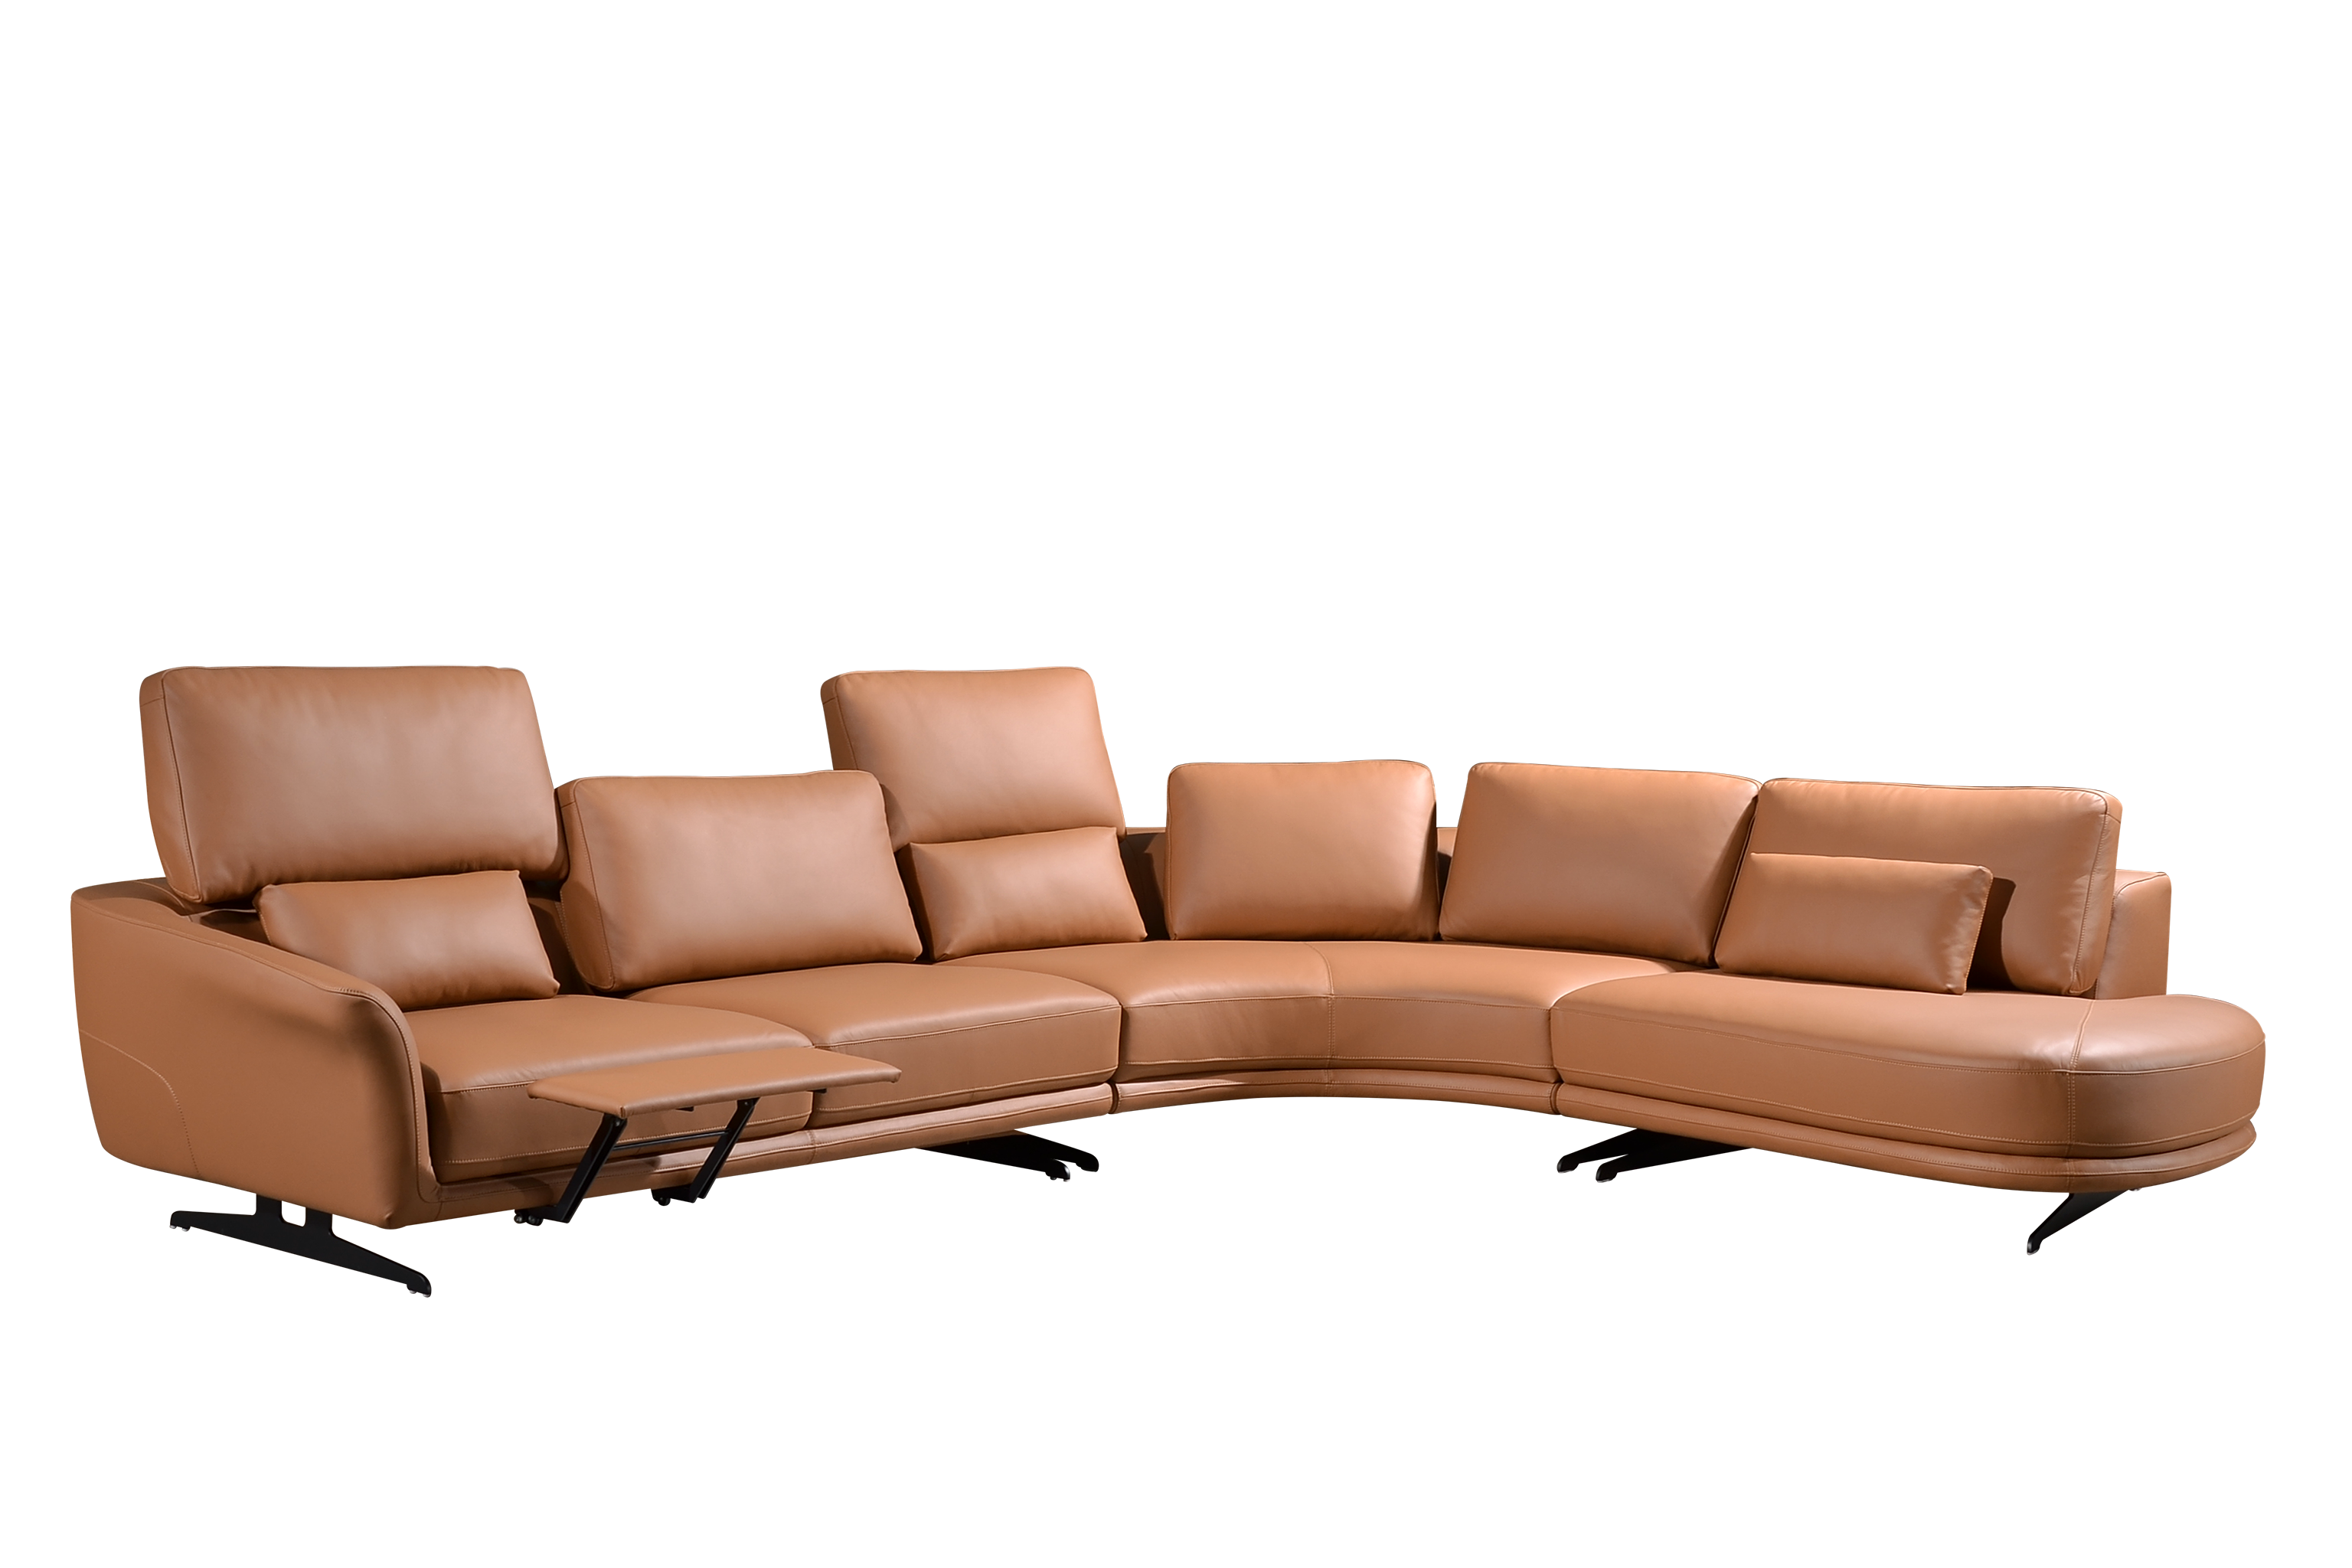 HELIOS Sectional Sofa in Leather by Castilla